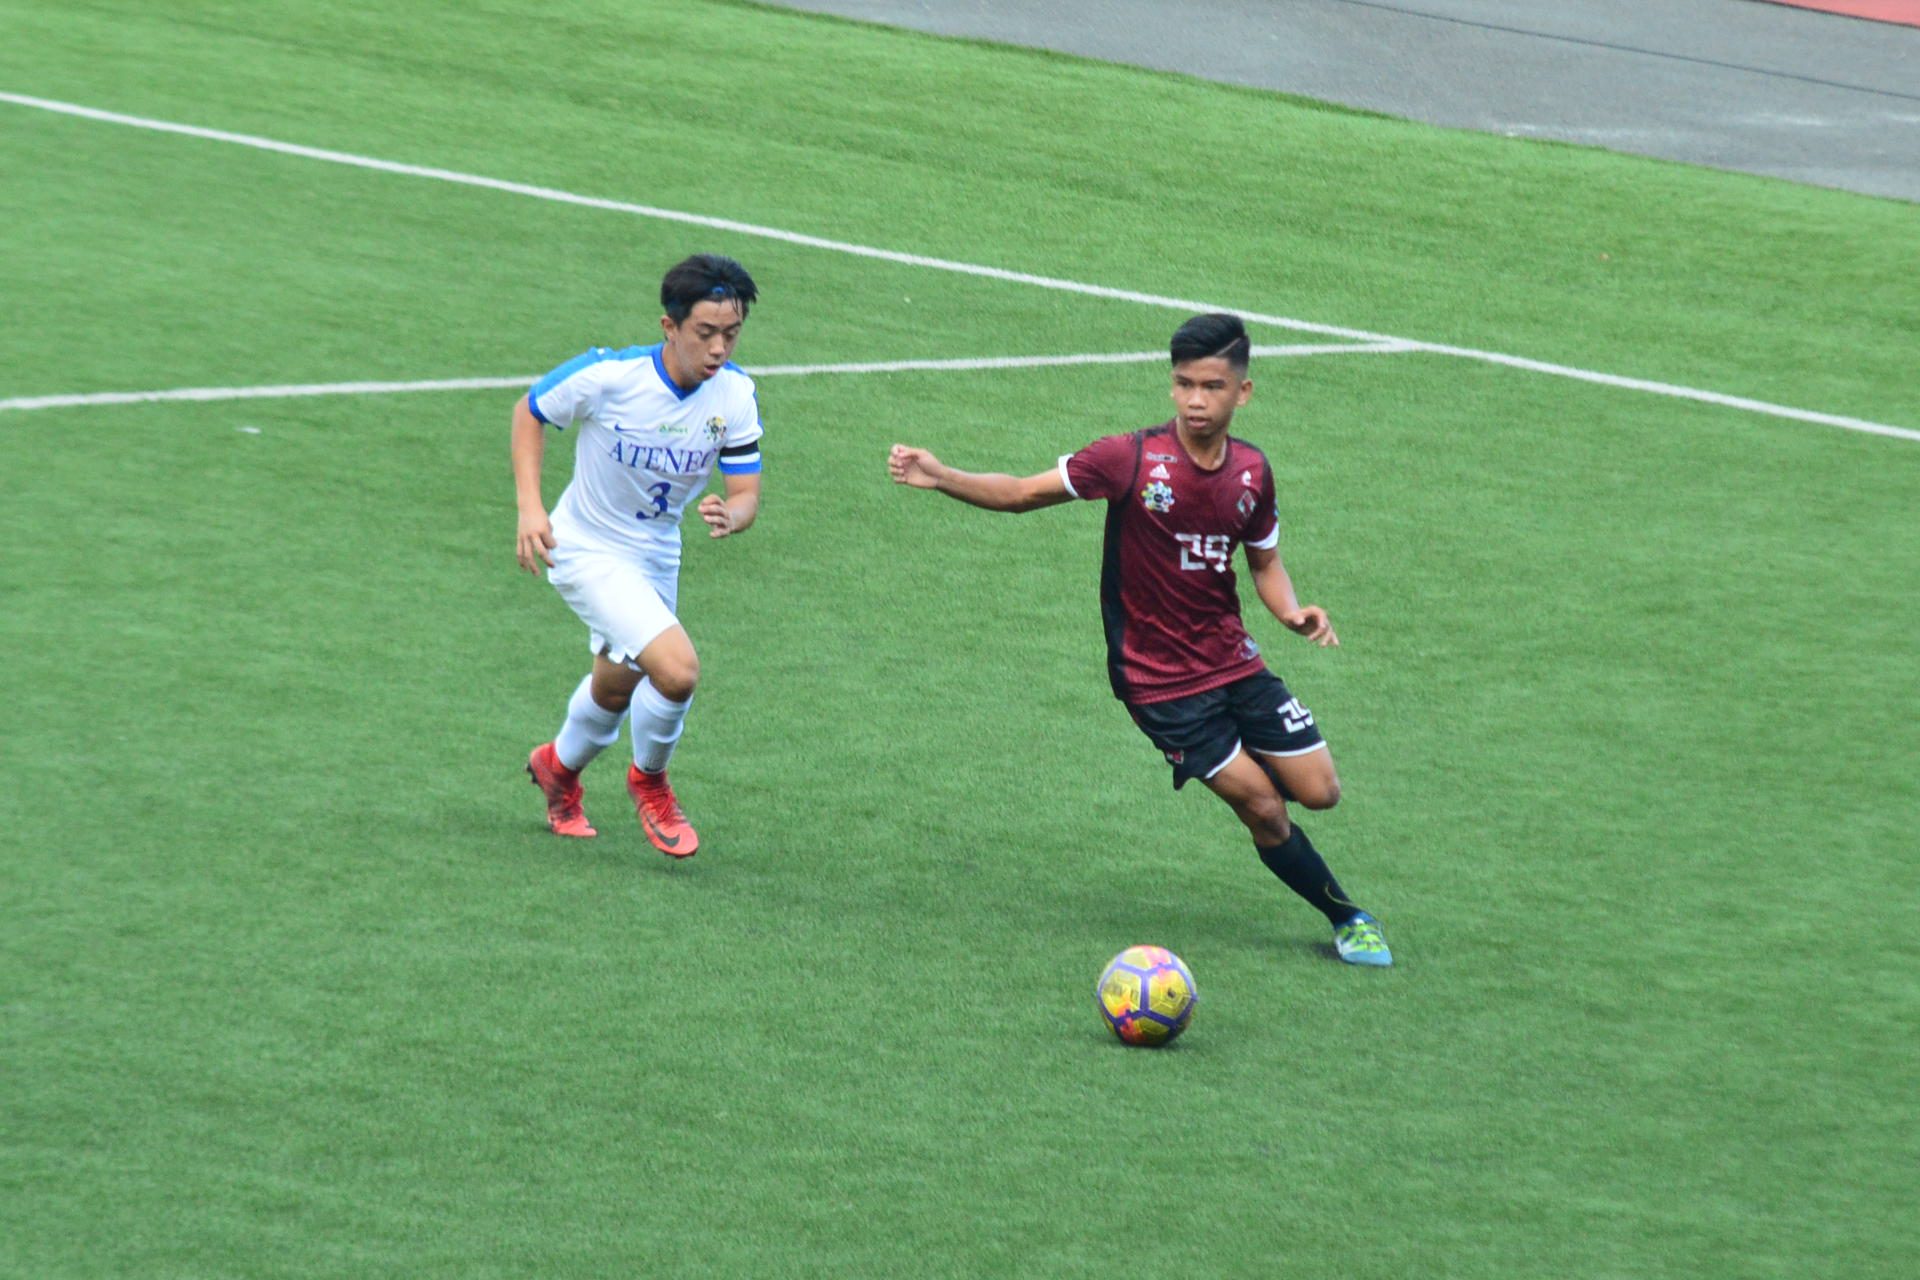 UAAP Men’s Football: No coronation for UP just yet